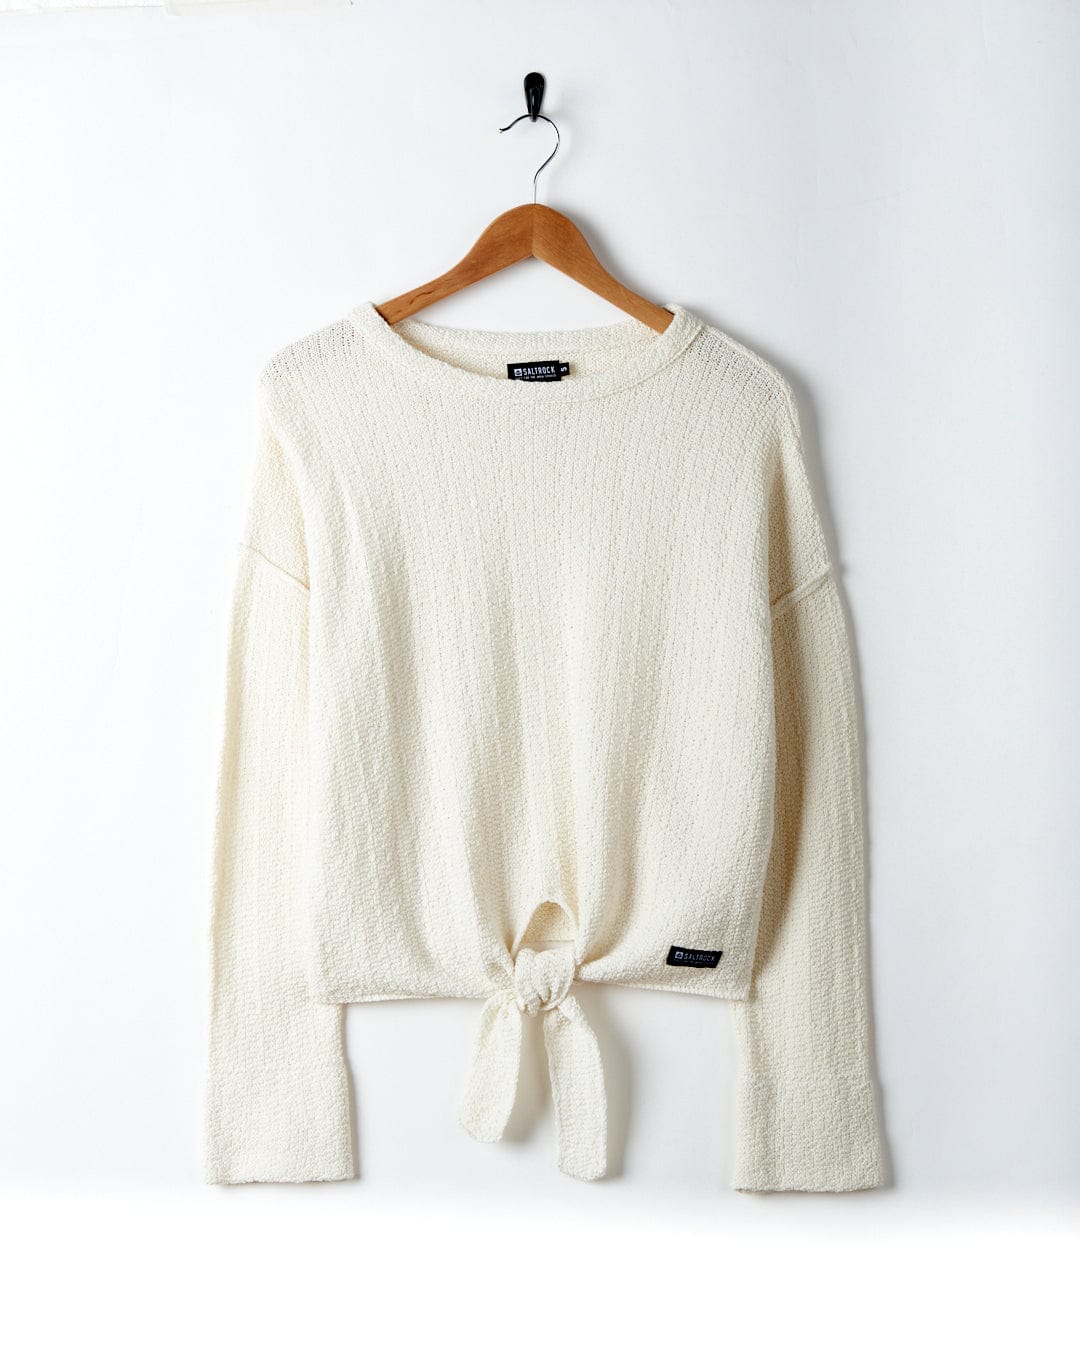 A Beachcomber - Womens Tie Waist Jumper - Cream by Saltrock, with a tie-front detail, hanging on a wooden hanger against a plain white wall.